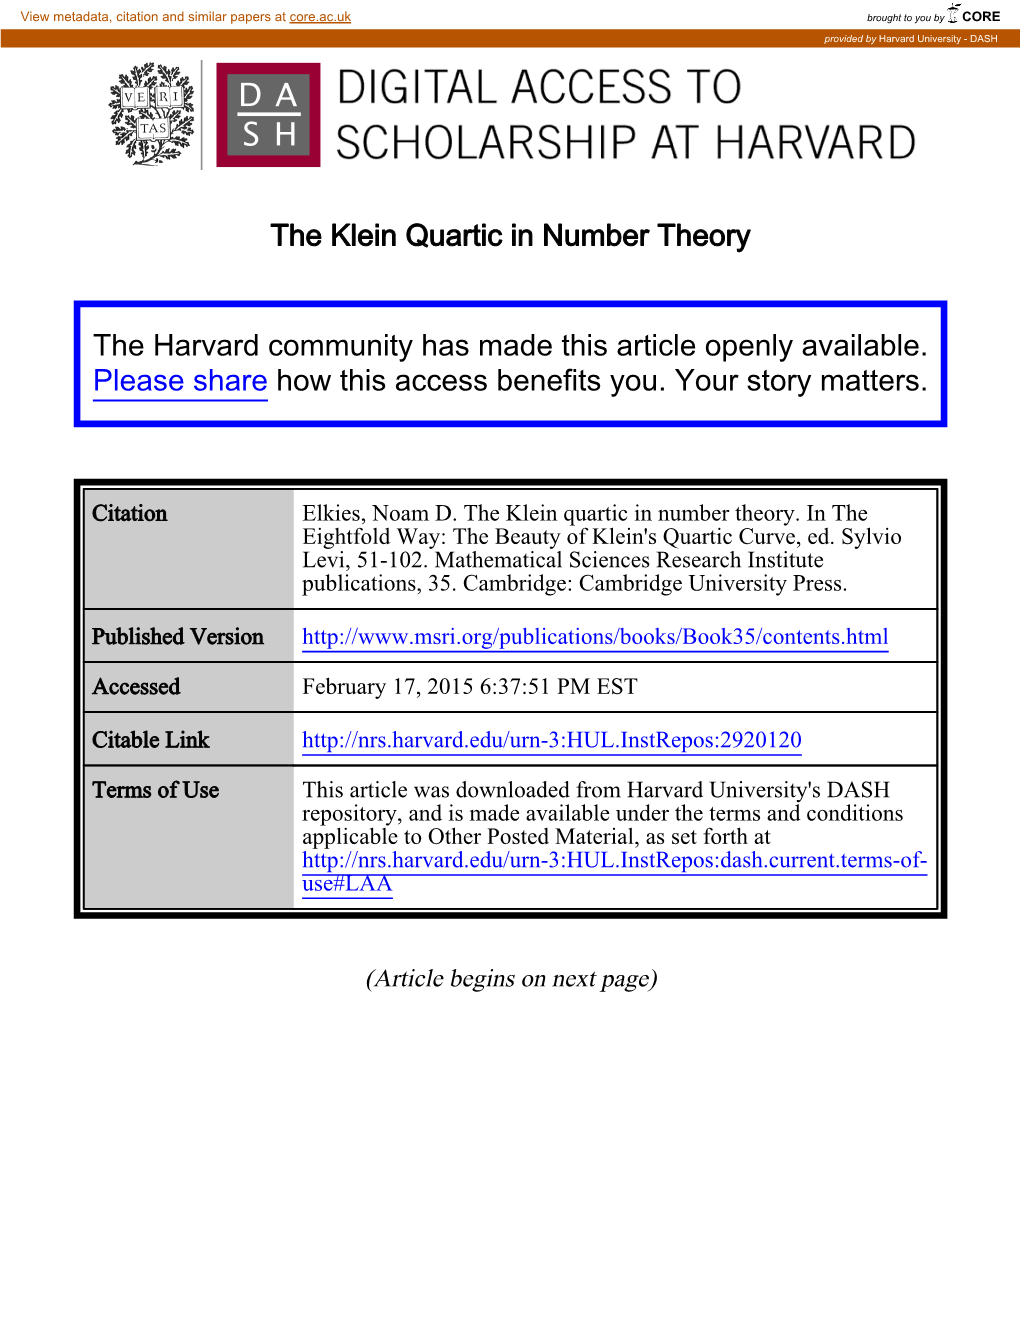 The Klein Quartic in Number Theory the Harvard Community Has Made